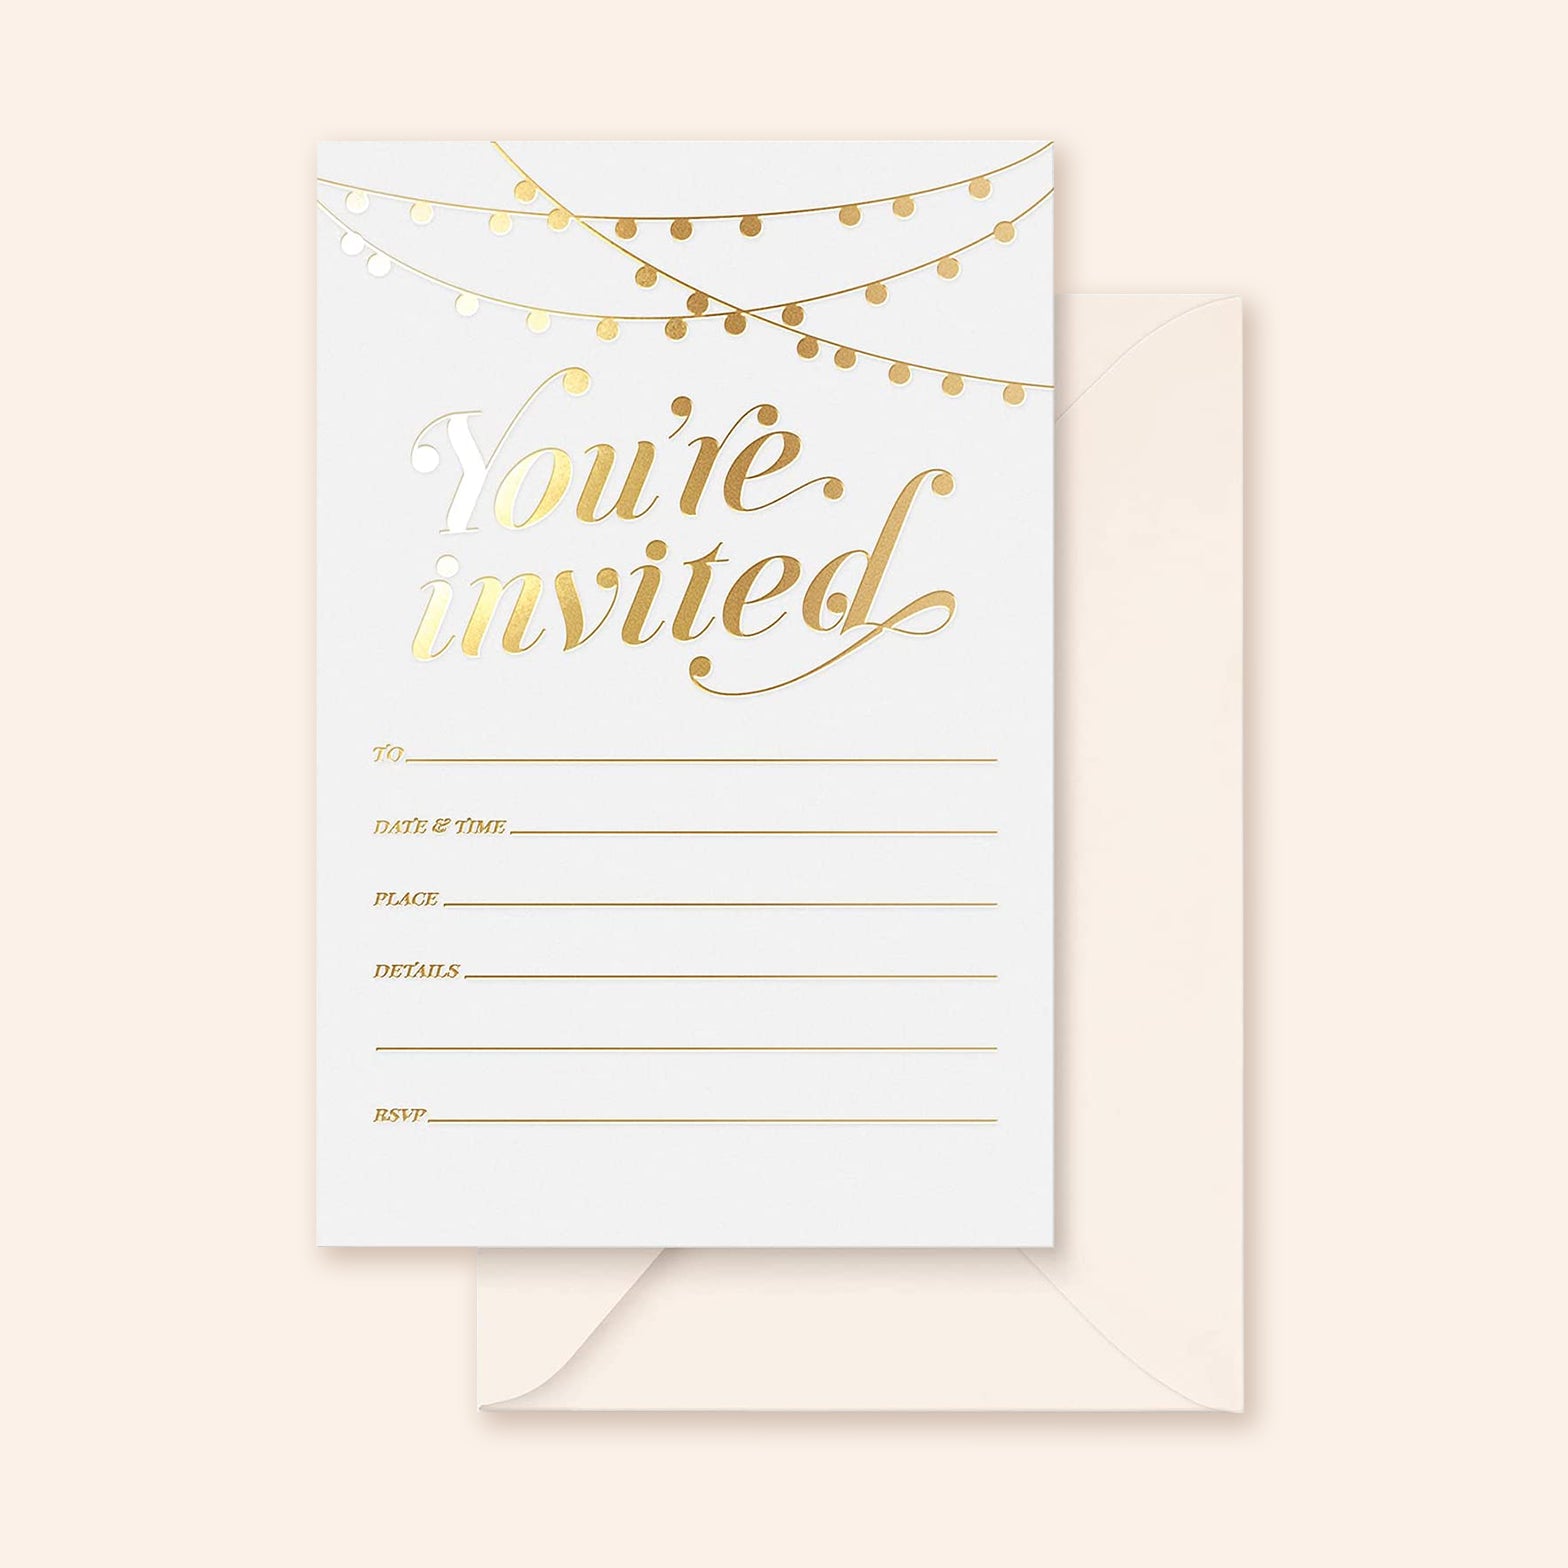 Gold Foil Party Invitation Cards | Set of 25